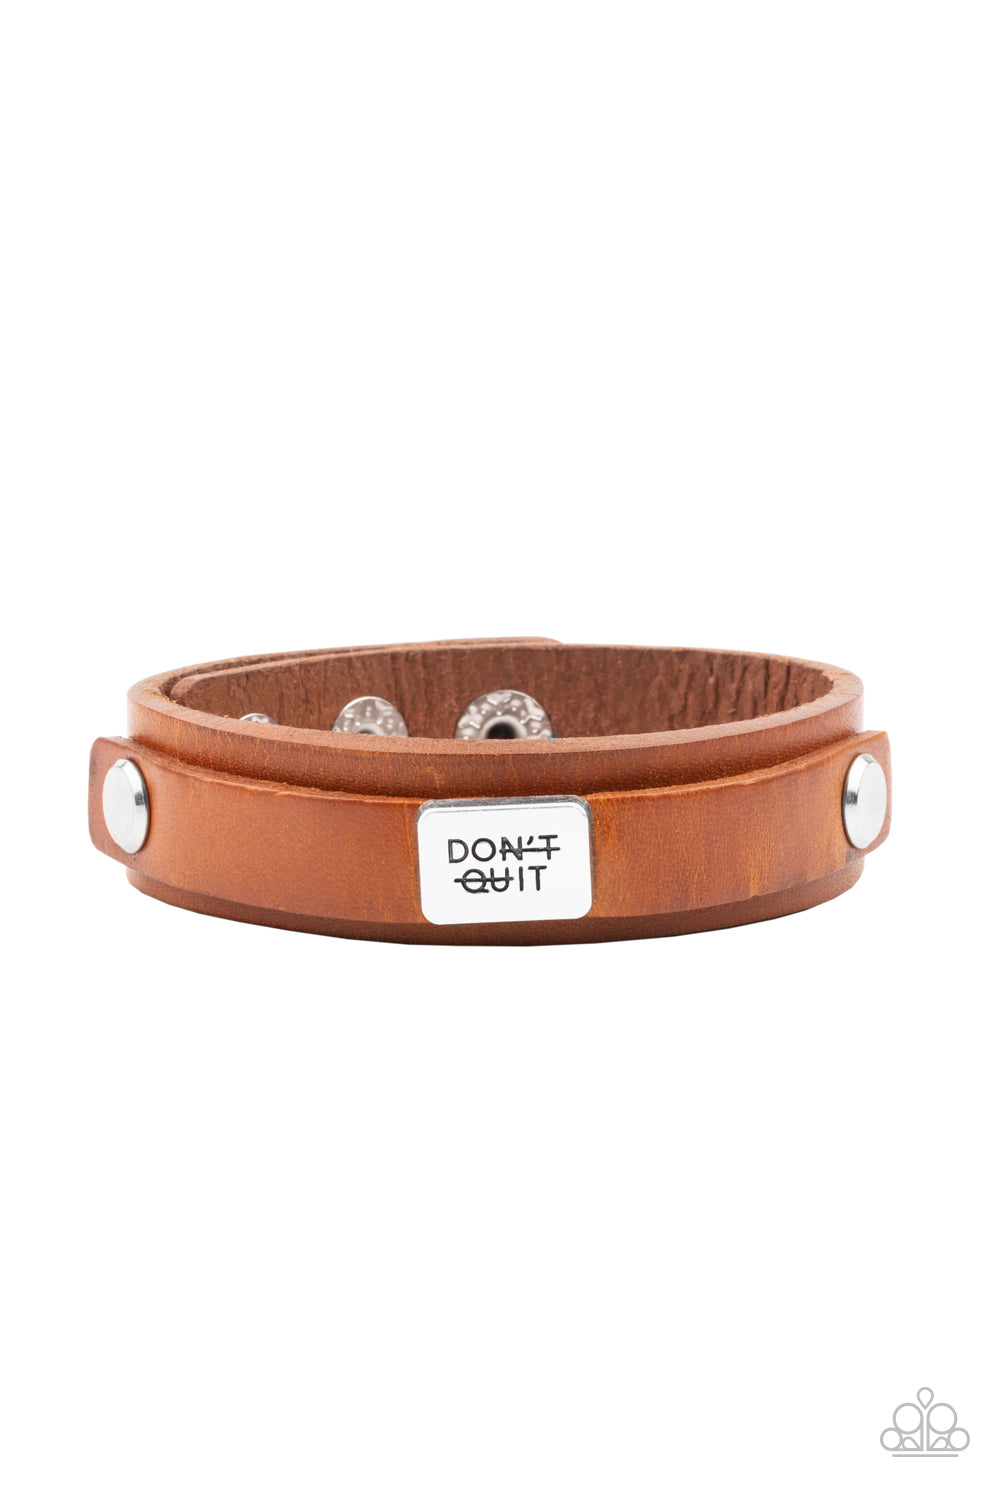 DONT QUIT NOW - BROWN LEATHER INSPIRATIONAL BRACELET